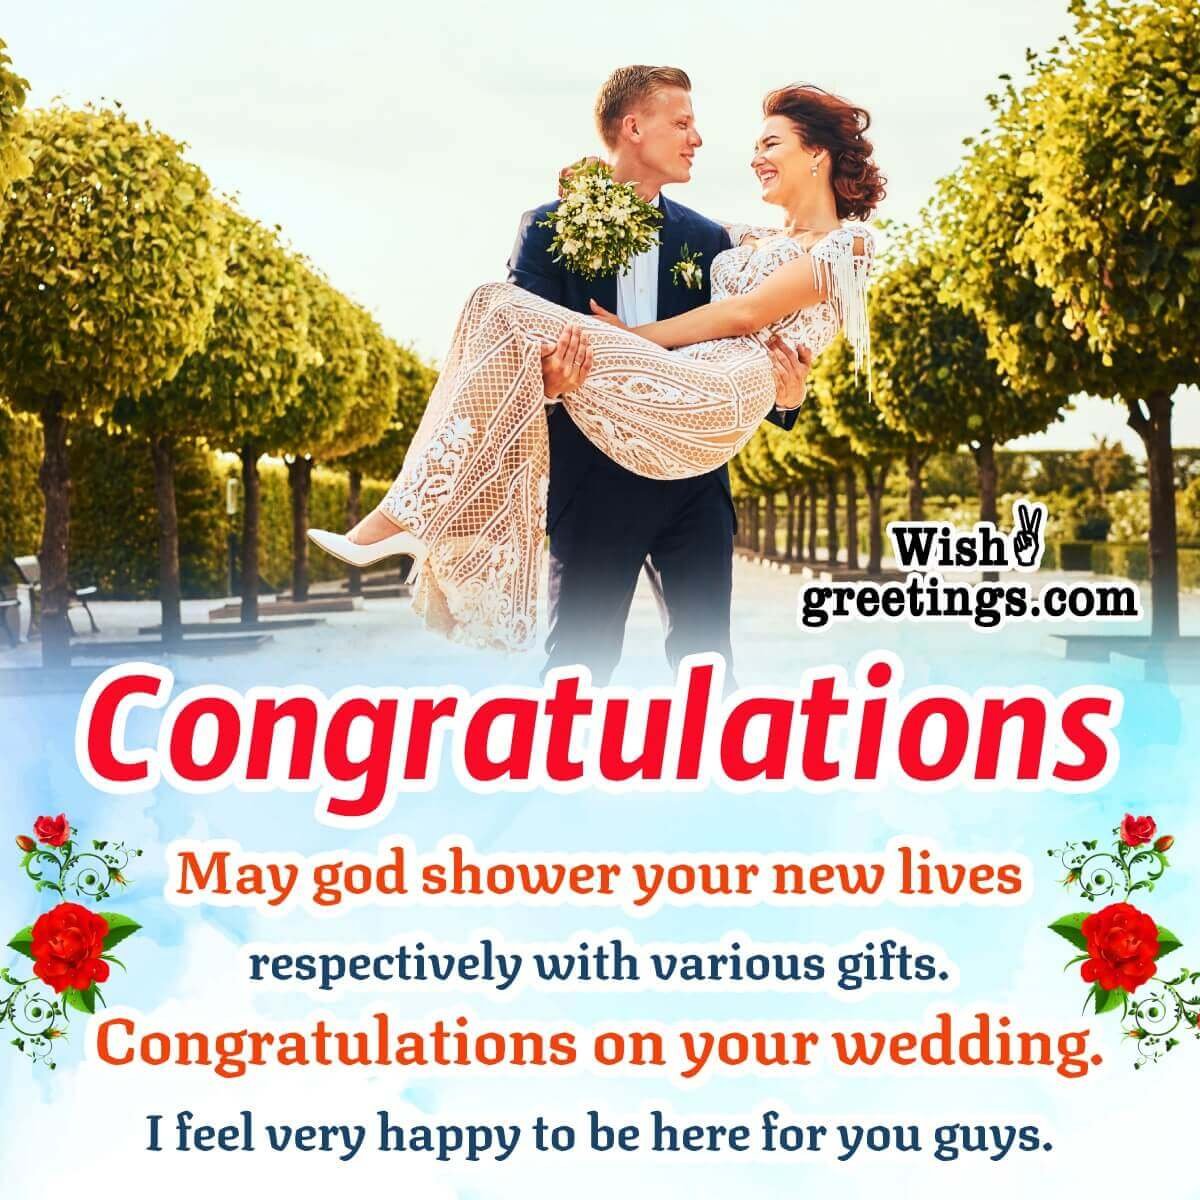 Congratulations On Your Wedding Message Image